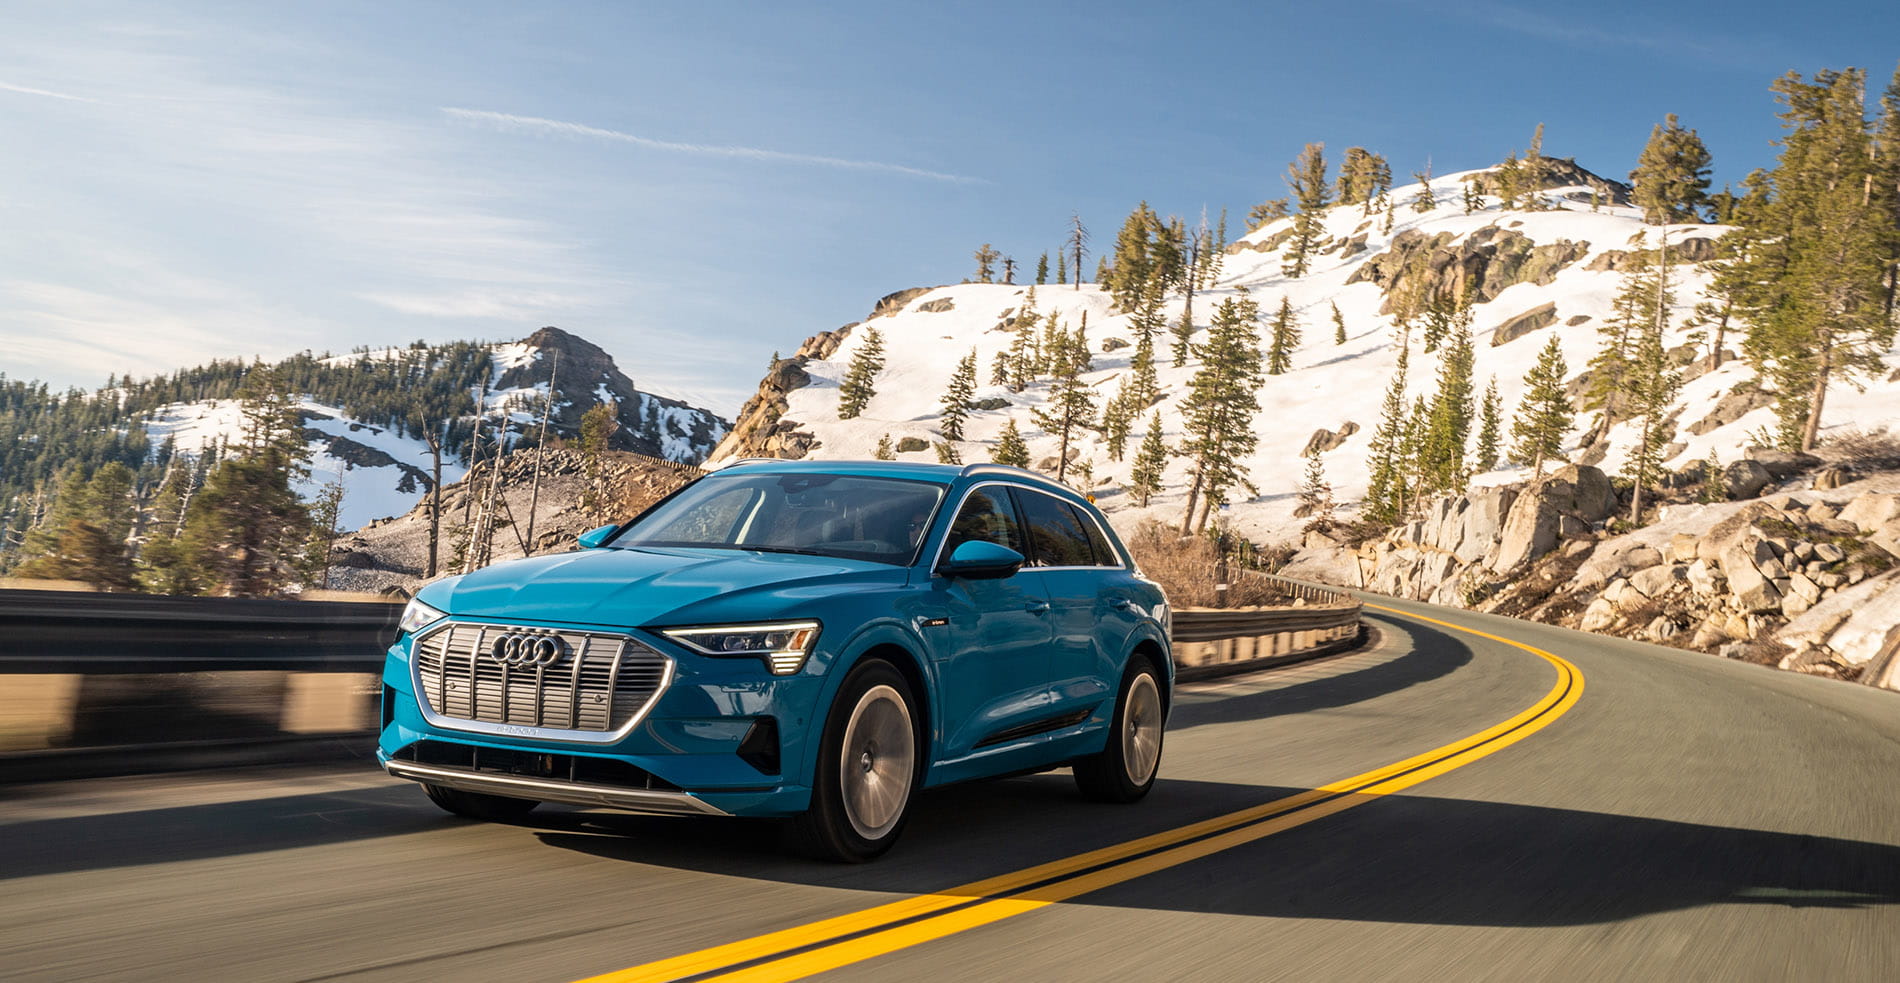 Audi's first all electric car is set to make a spot in aspen for free test drives.